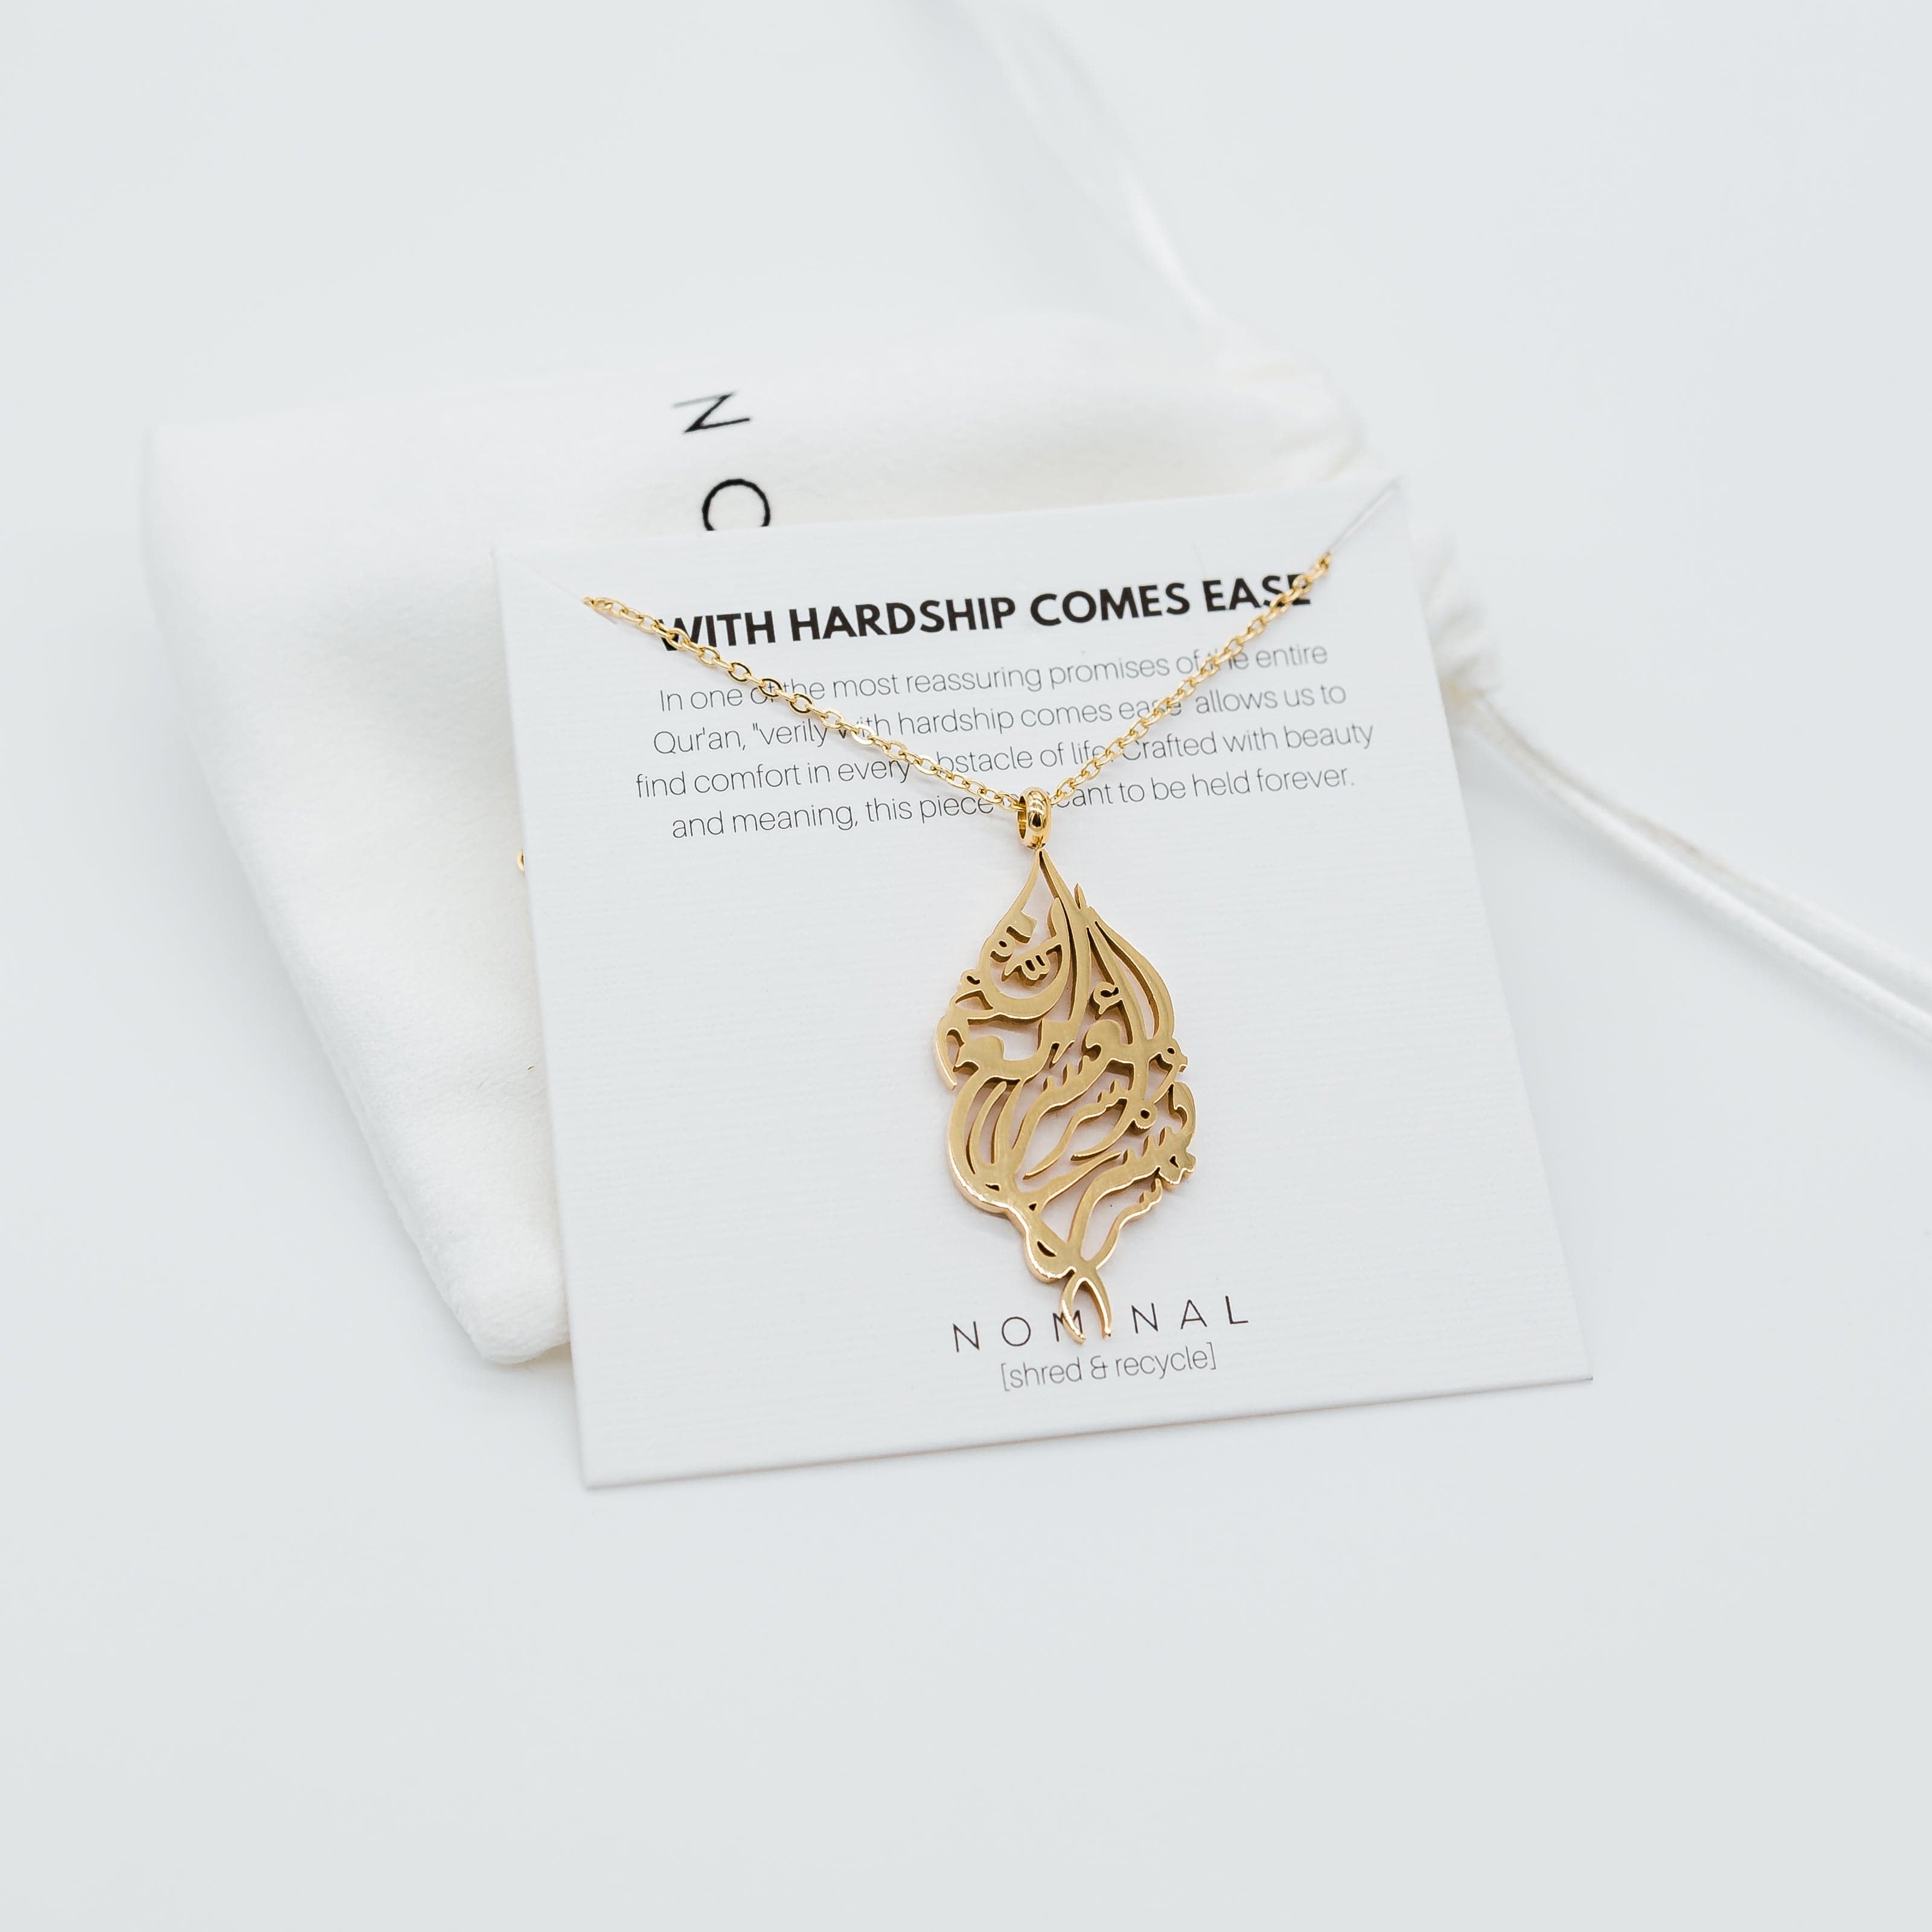 "Verily, with Hardship Comes Ease" Calligraphy Necklace - Nominal